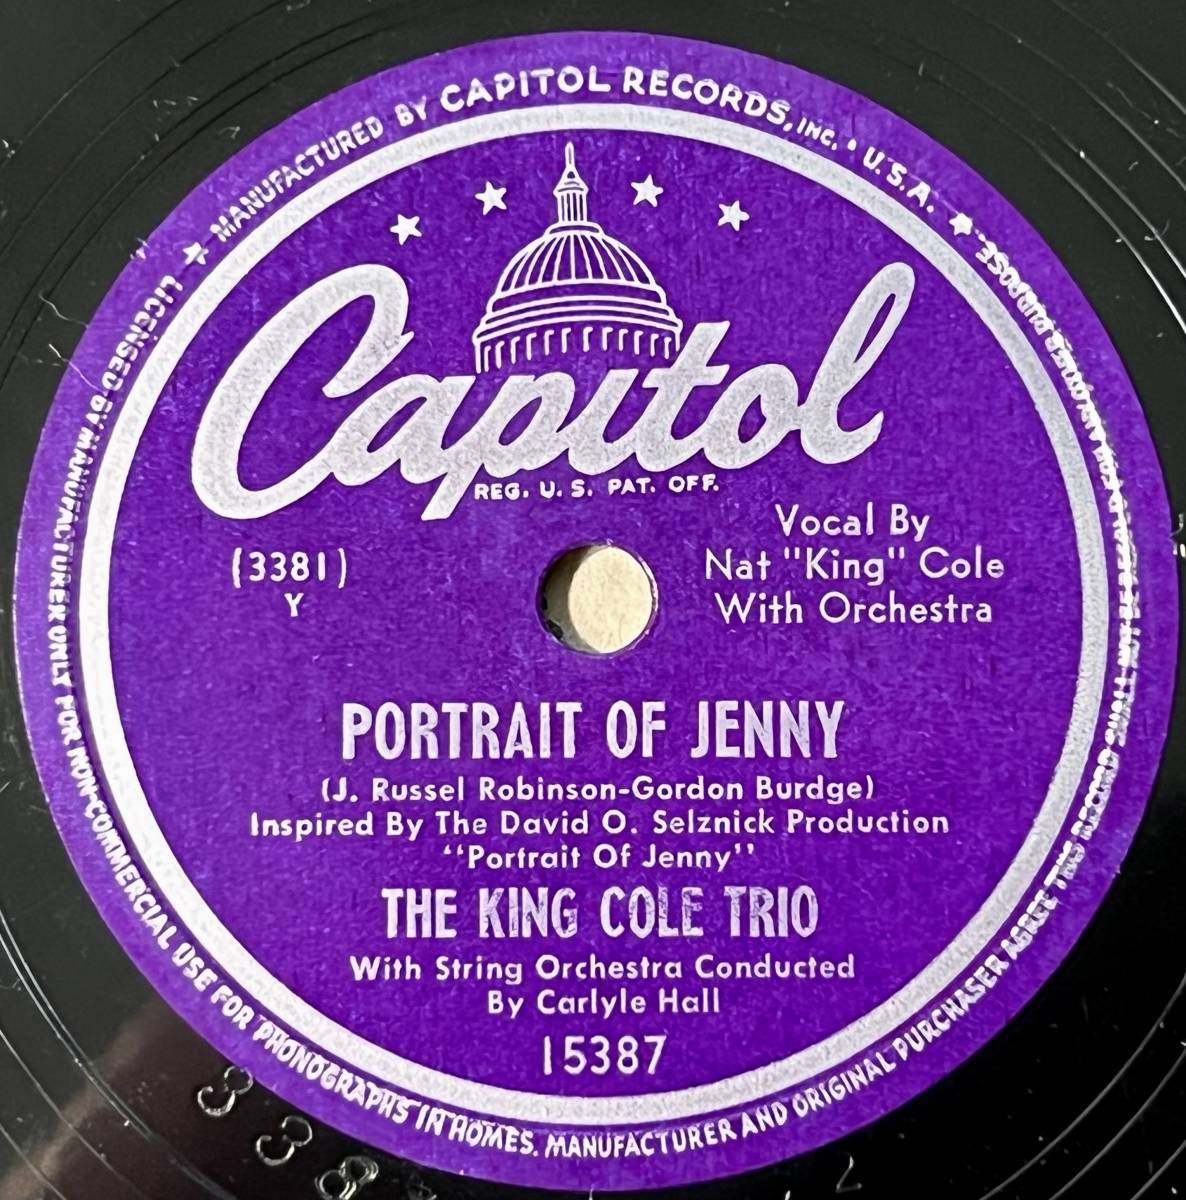 NAT KING COLE TRIO CAPITOL An Old Piano The Blues/ Portrait Of Jenny